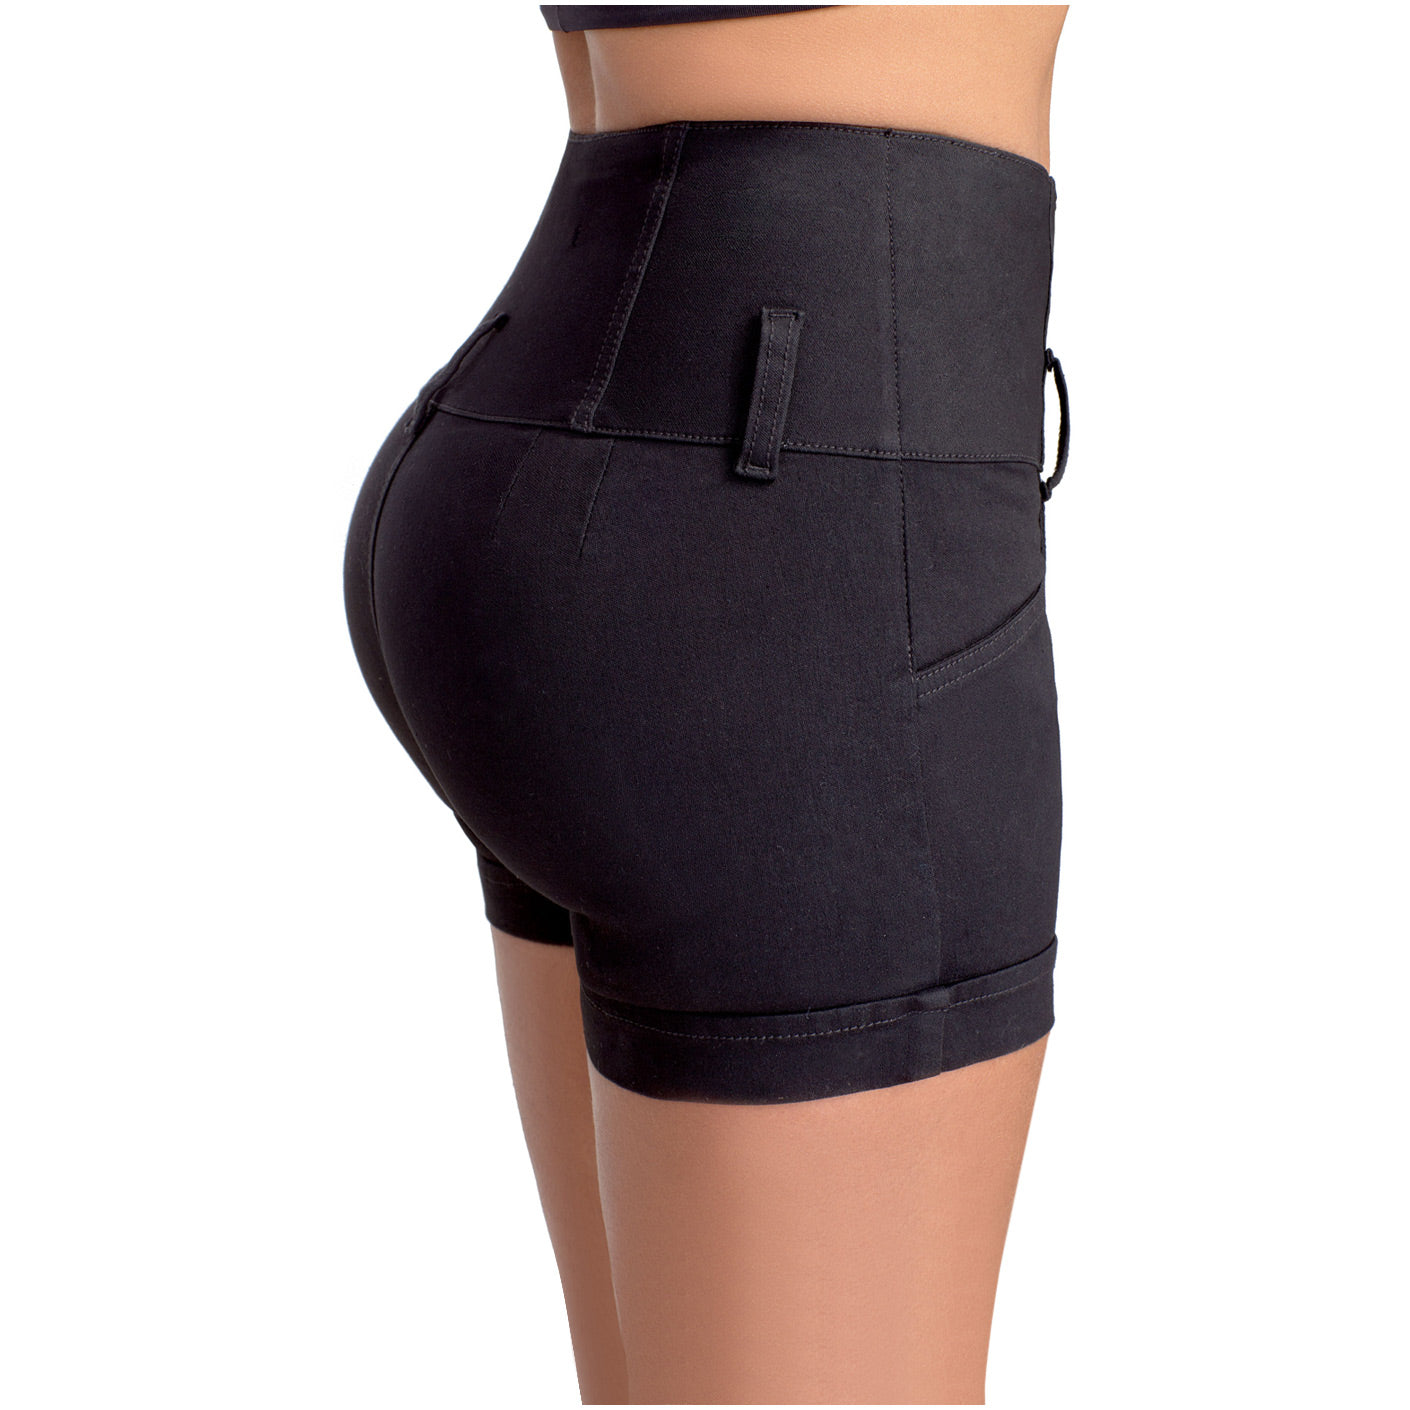 LOWLA 238289 - High-waisted Butt Lifting Shorts with Inner Girdle